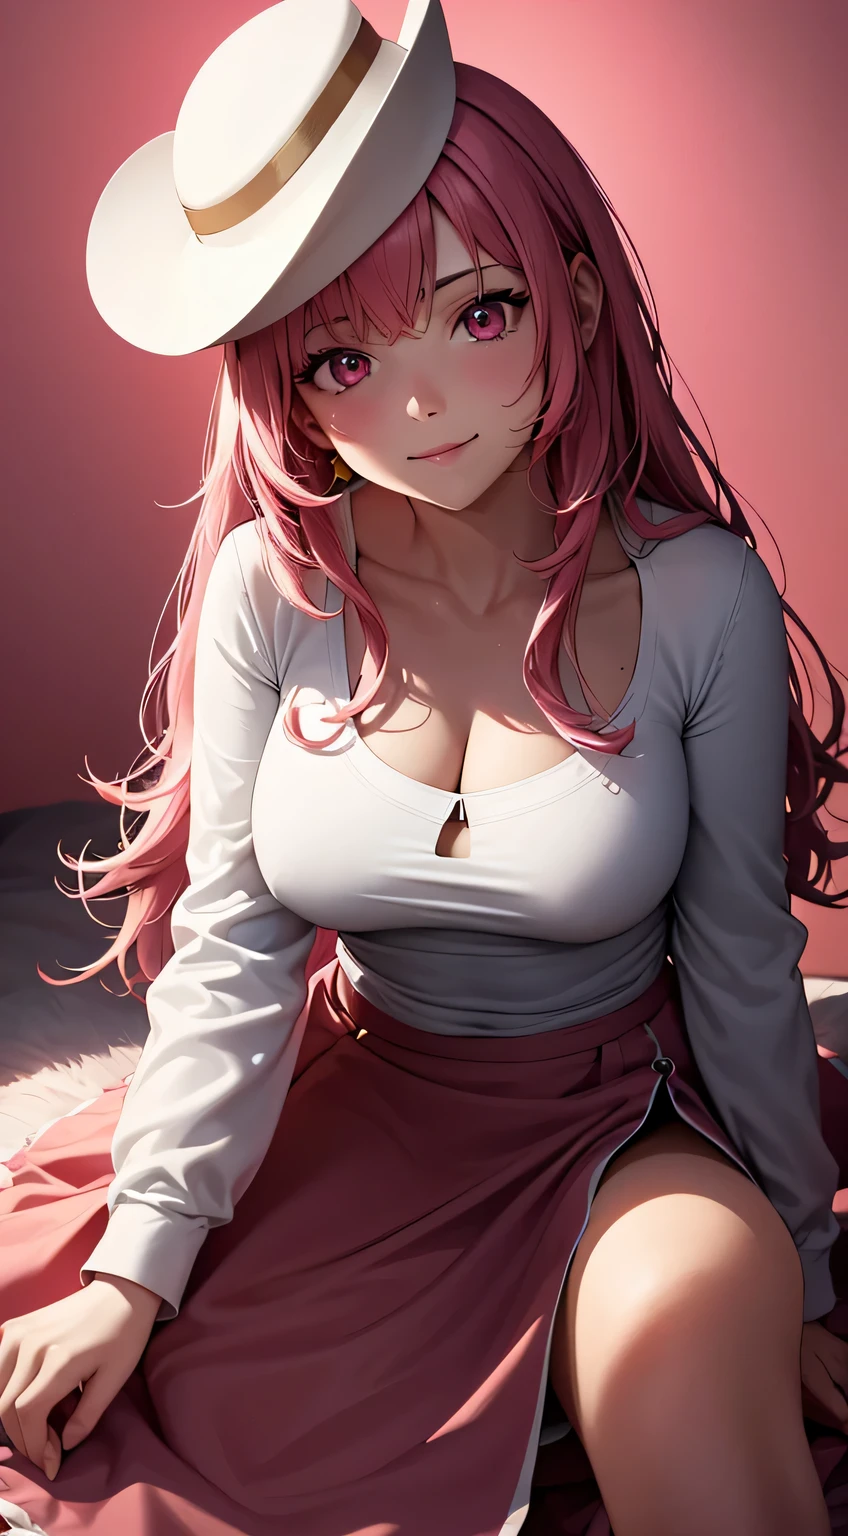 (best quality:1.5, highres, UHD, 4K, detailed lighting, shaders), white wavy hair, gradient hair, large breasts, pink shirt, pink skirt jeans, mature woman , pink Witcher hat, (pov), white background, colorful red eyeshadow, dramatic lighting, smile eyepression, golden earrings, flowing hair, delicate facial features, dark skin, high cheekbones, white background, stand up, lean forward, full body